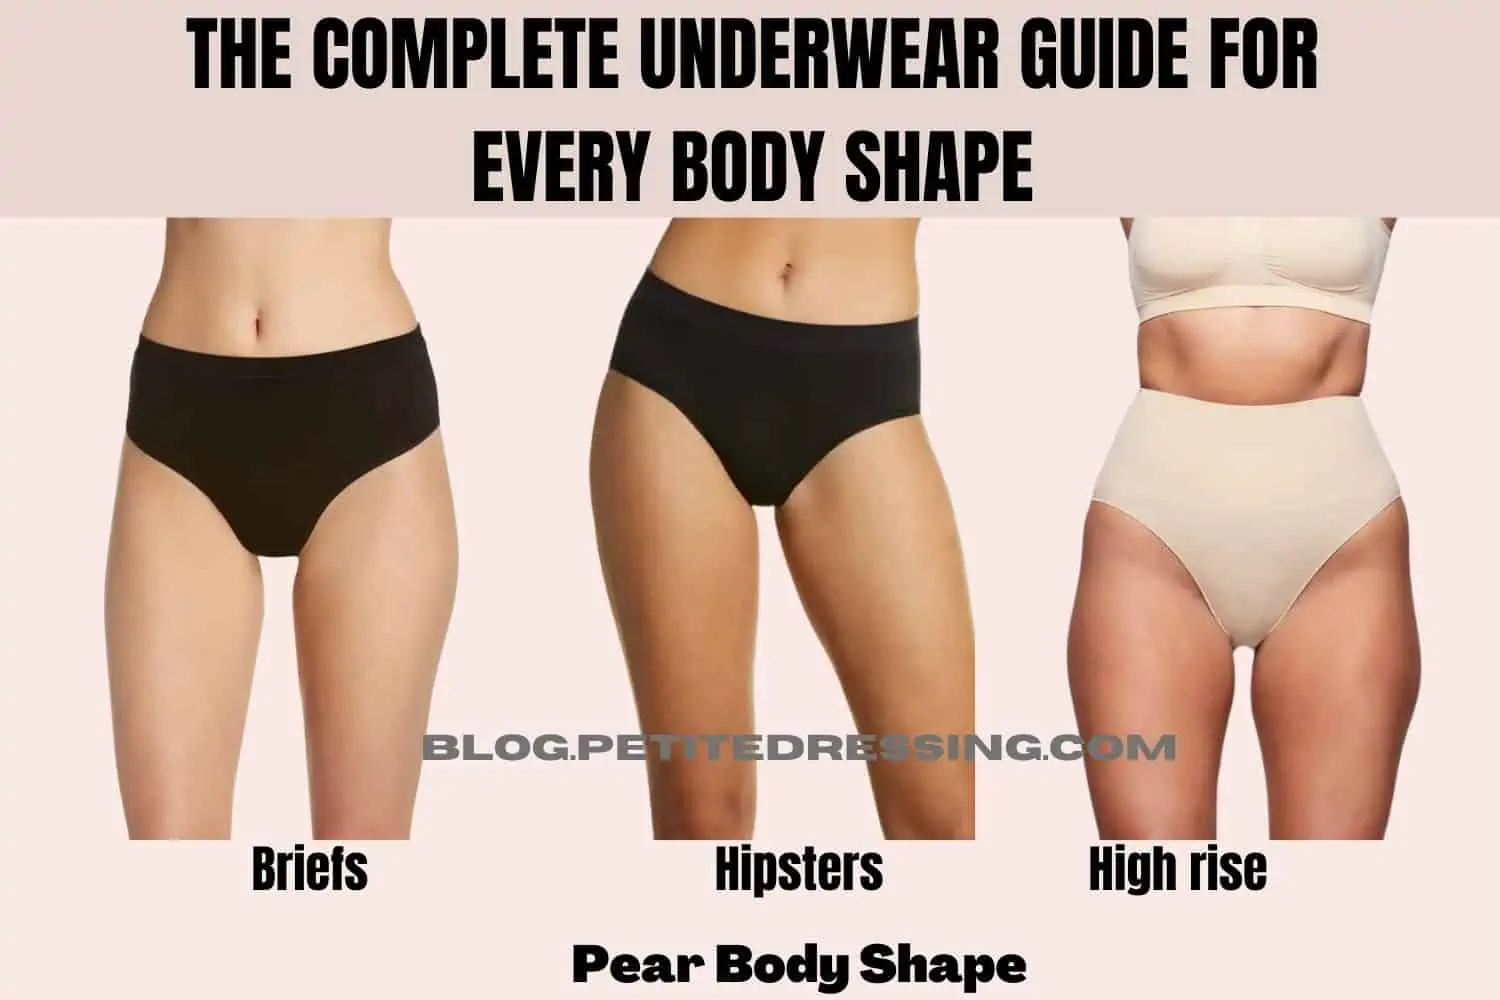 Choosing Panties for Your Body Type-that Make You Feel Sexy and